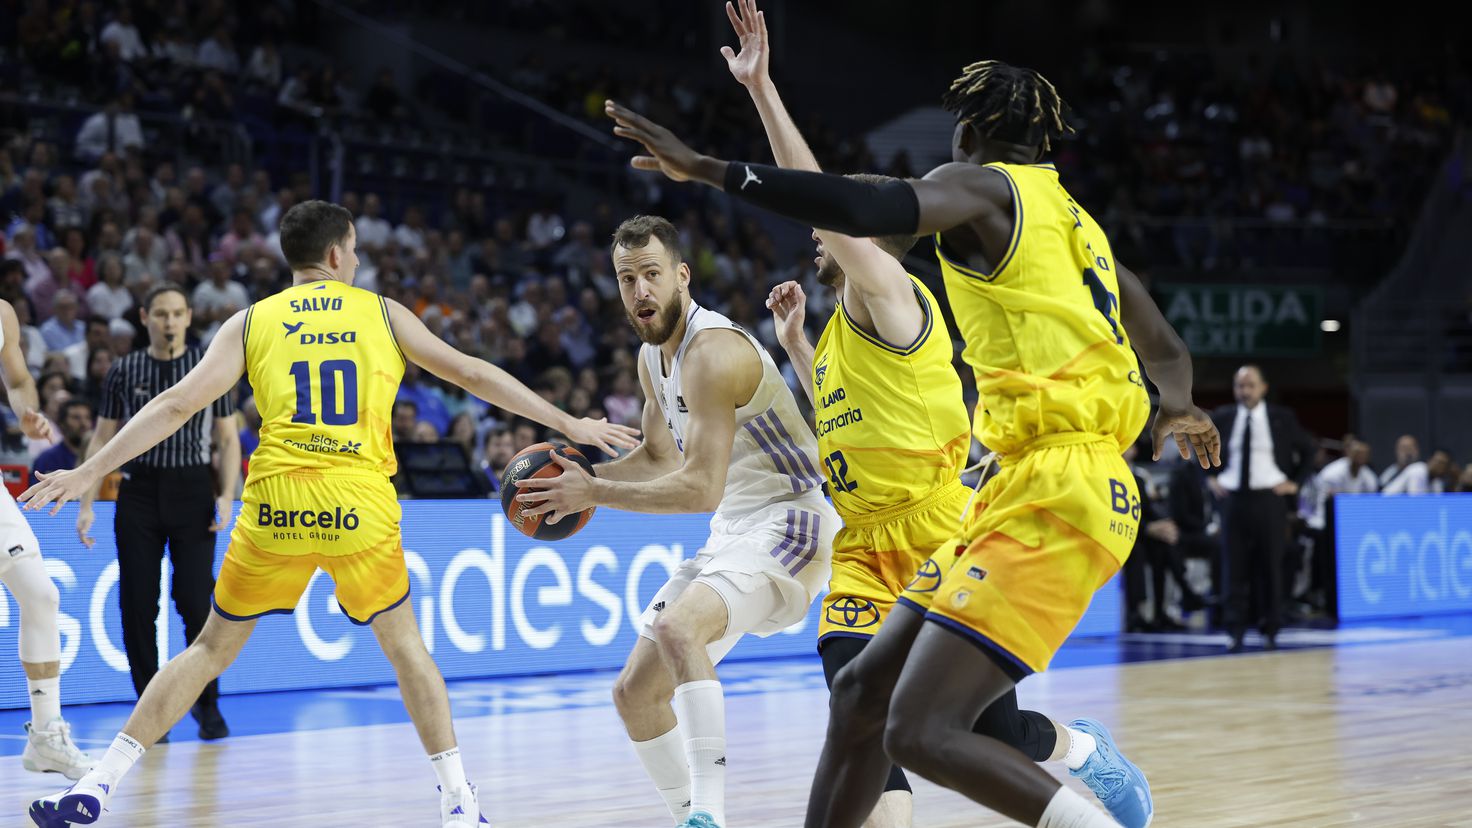 Chachismo destroys Granca and Llull breaks more records
